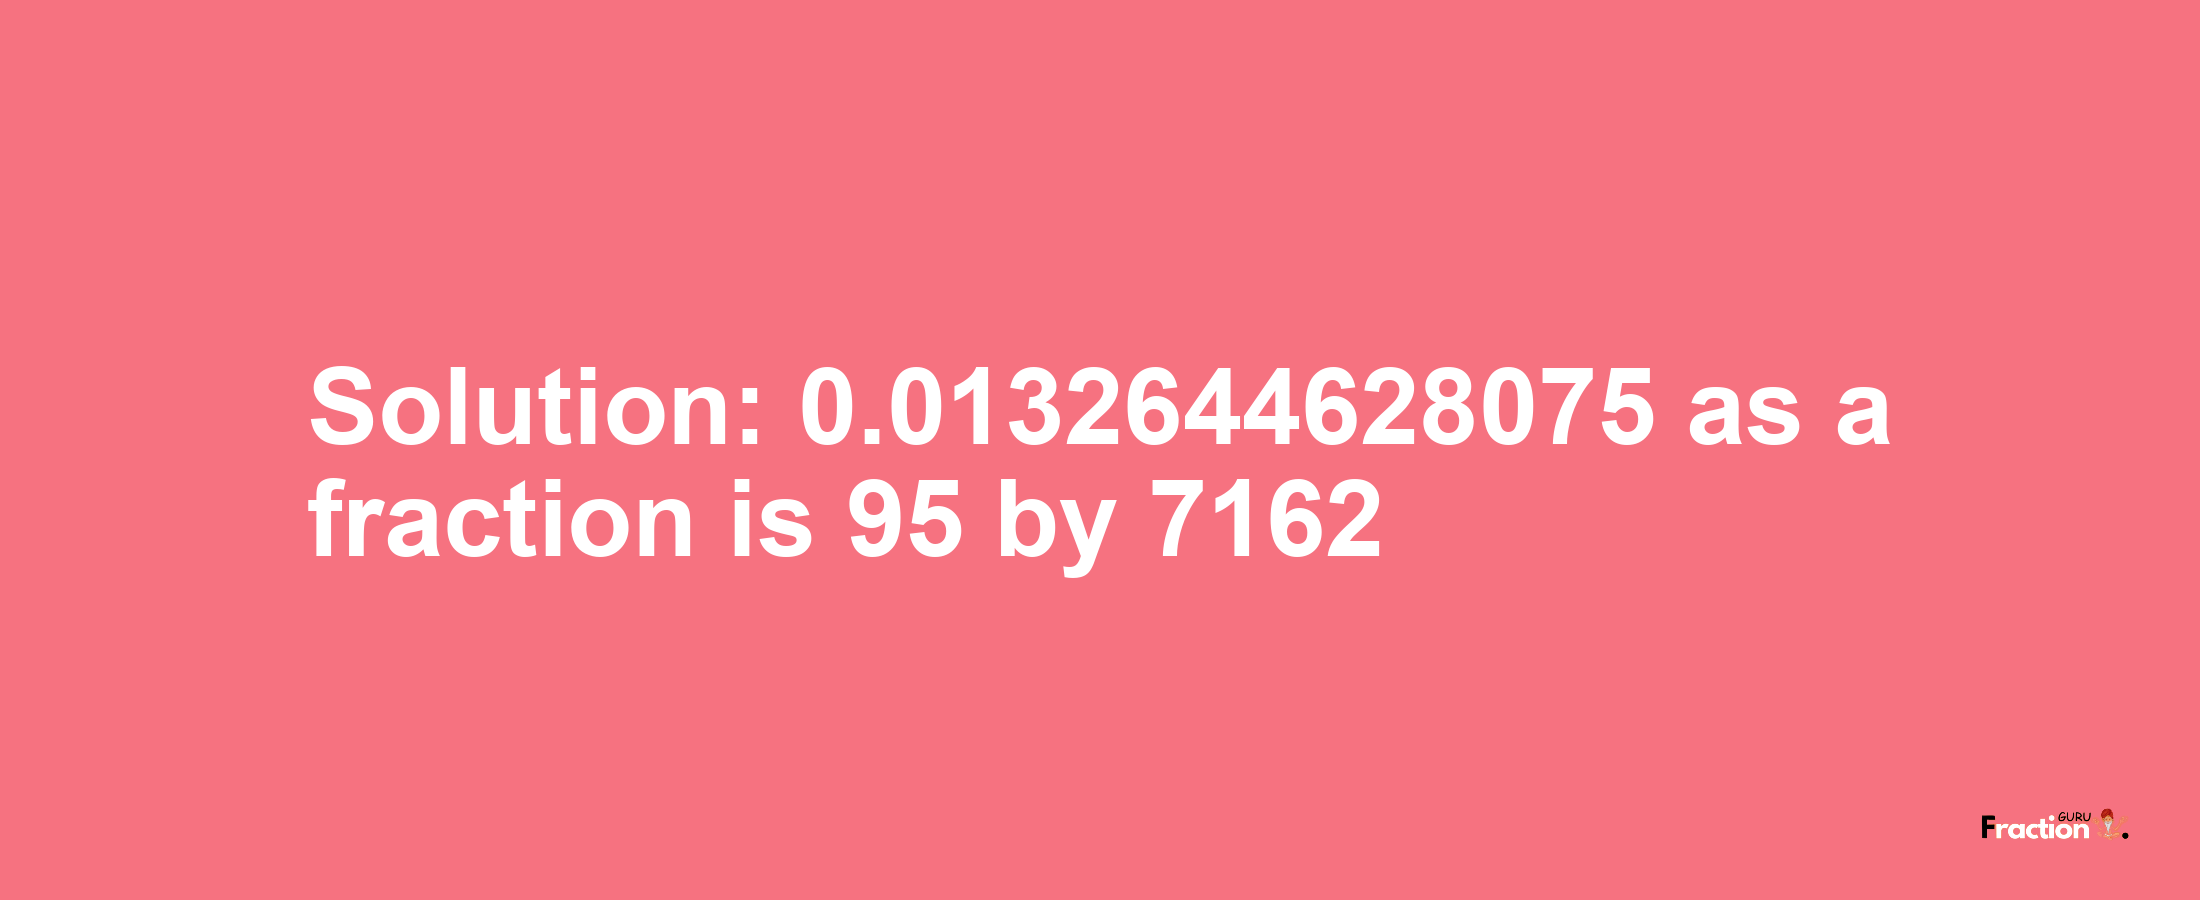 Solution:0.0132644628075 as a fraction is 95/7162